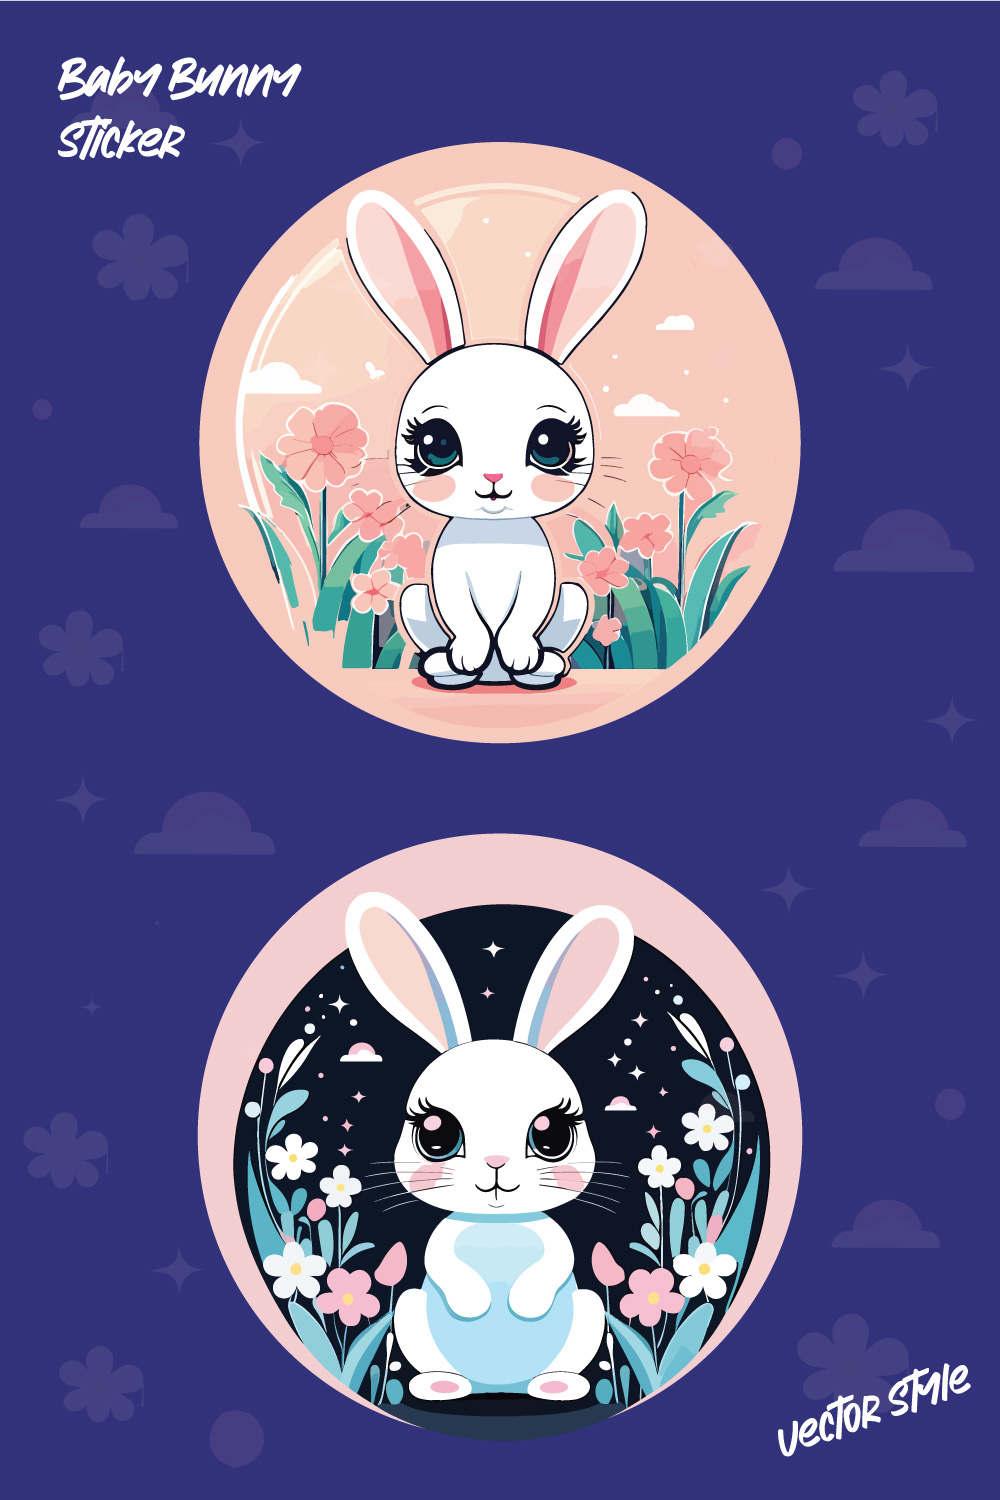 Baby Bunny Round Sticker & T shirt Design Vector Format Illustration pinterest preview image.